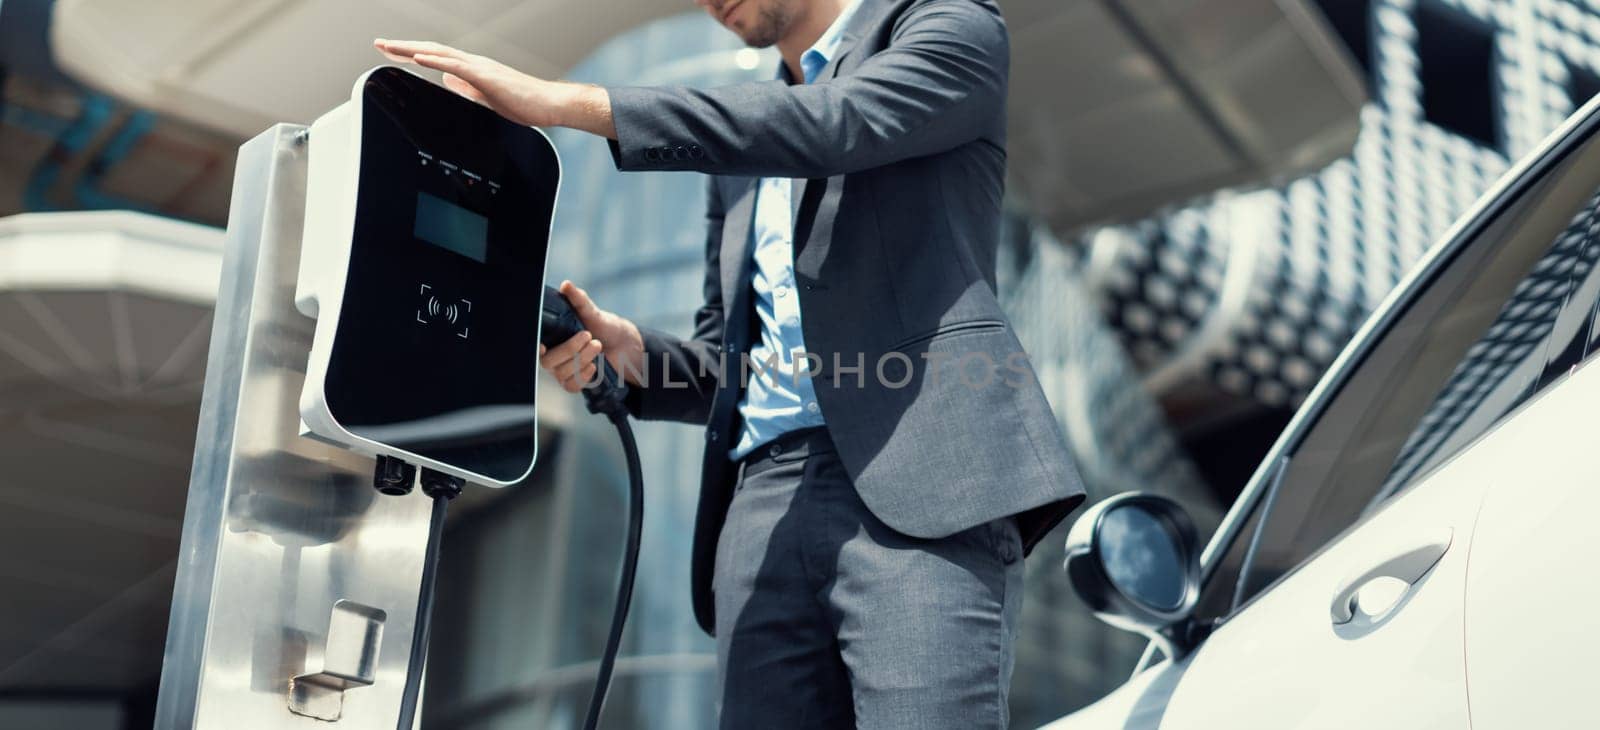 Below view of progressive businessman with electric car recharging at public charging station at modern city residential building. Eco friendly rechargeable EV car powered by alternative clean energy.